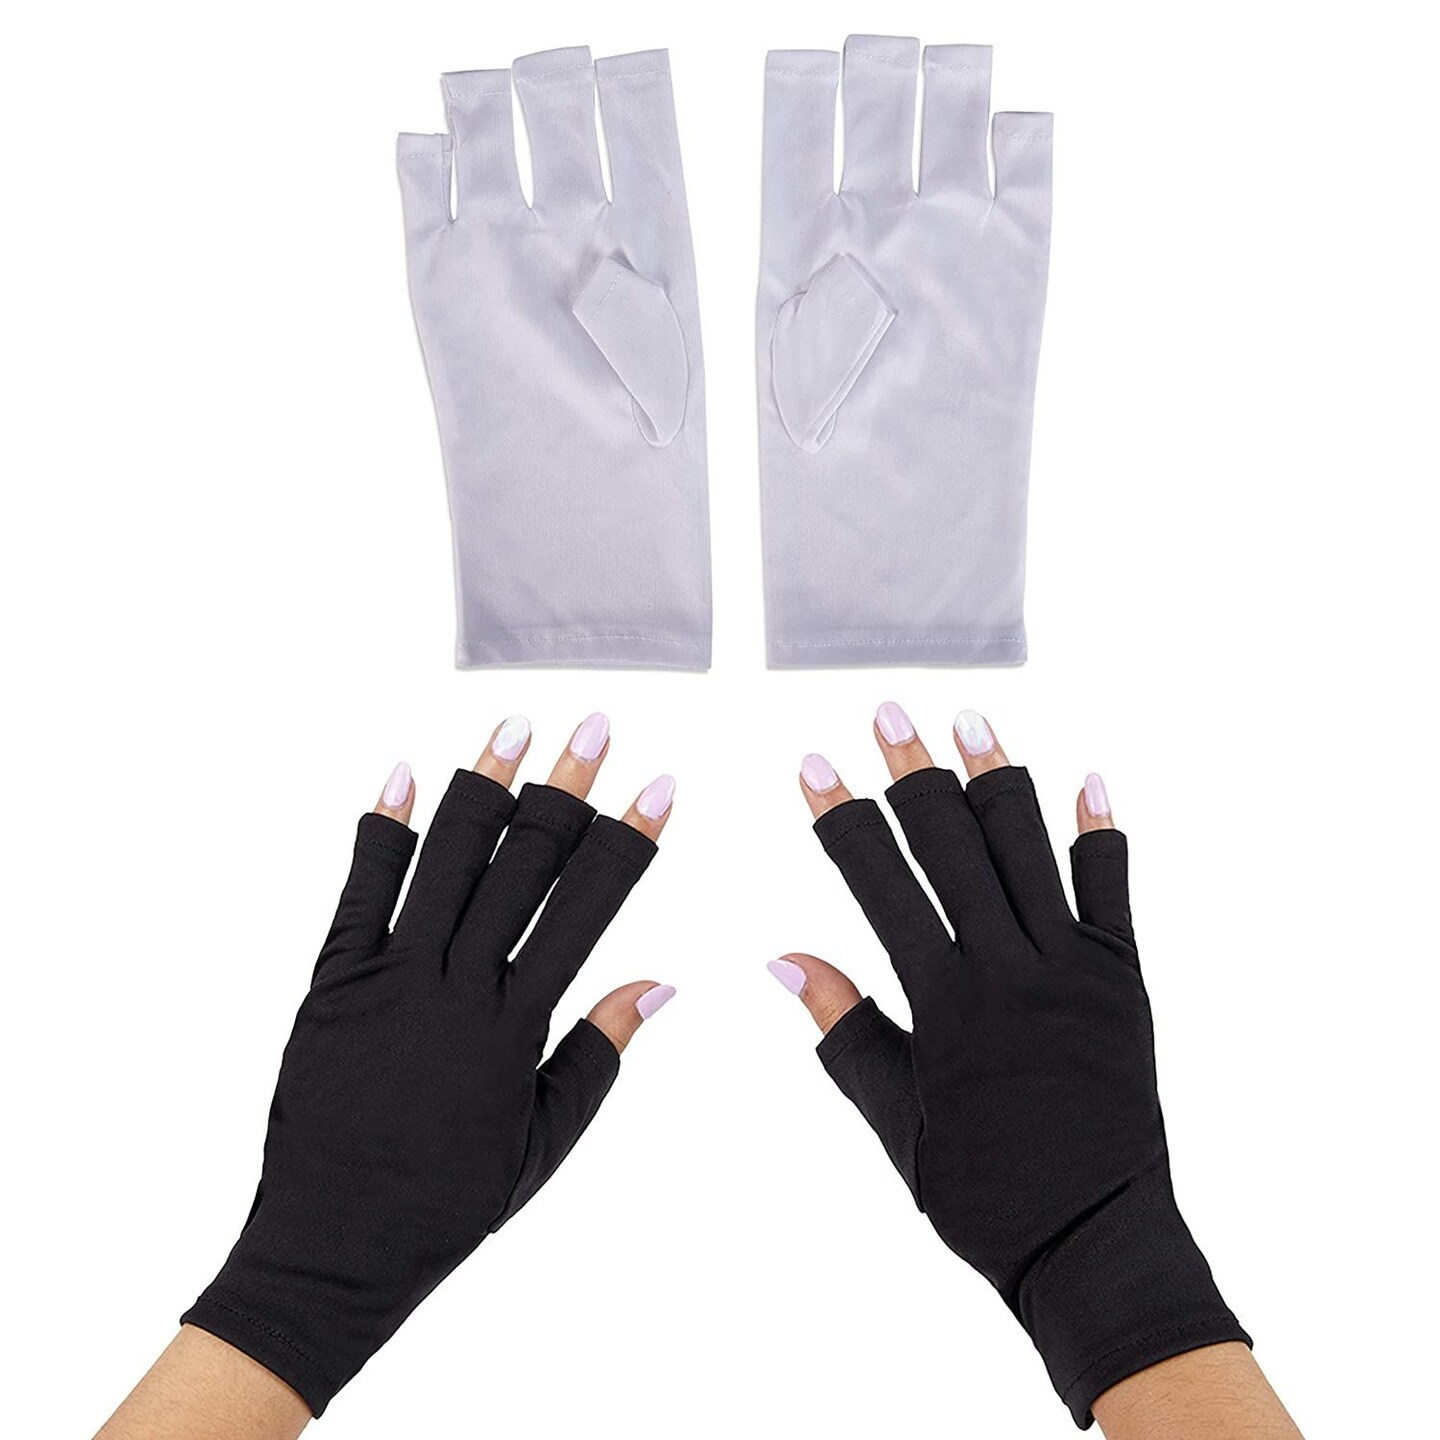 2 Pairs Uv Gloves For Gel Nail Lamp, Uv Protection Gloves For Manicures